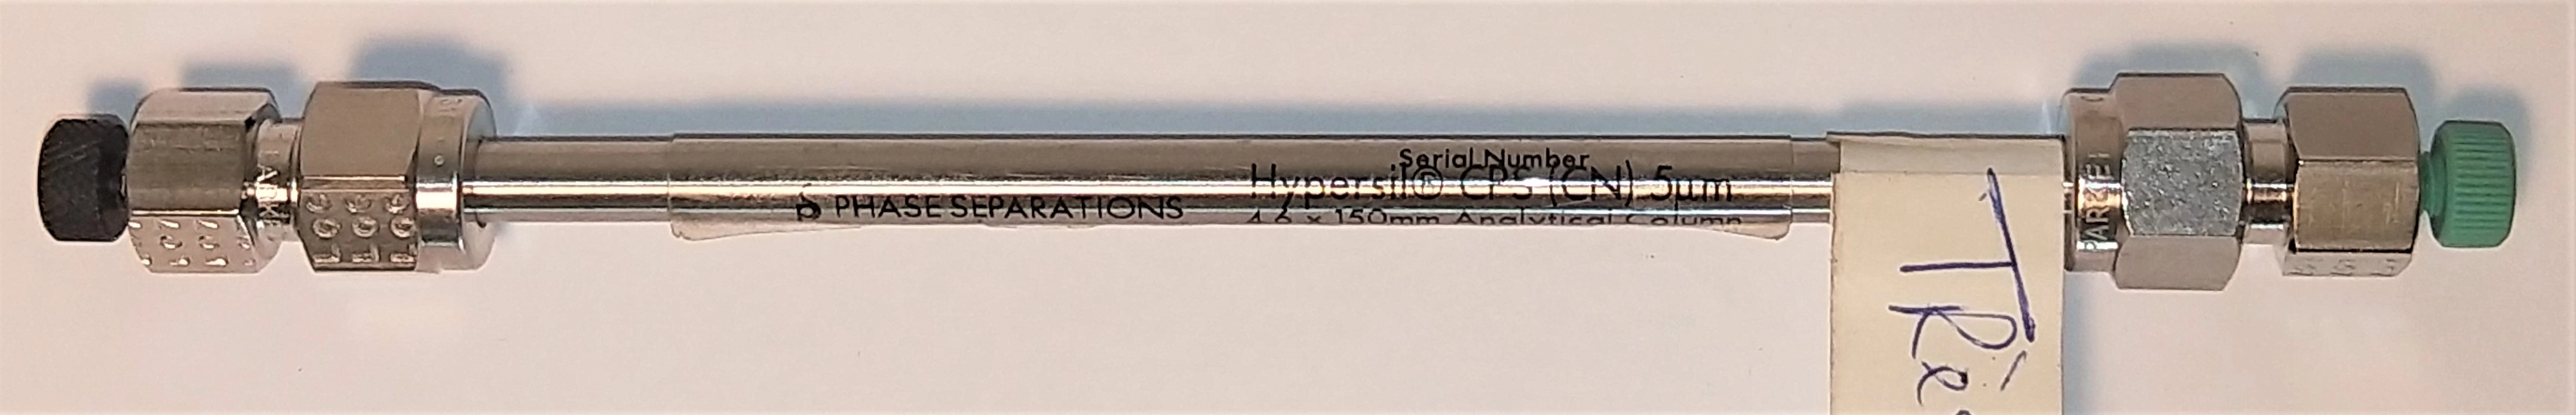 Thermo Hypersil CPS Cyano HPLC Column - 15 cm &times; 4.6 mm x 5&micro;m